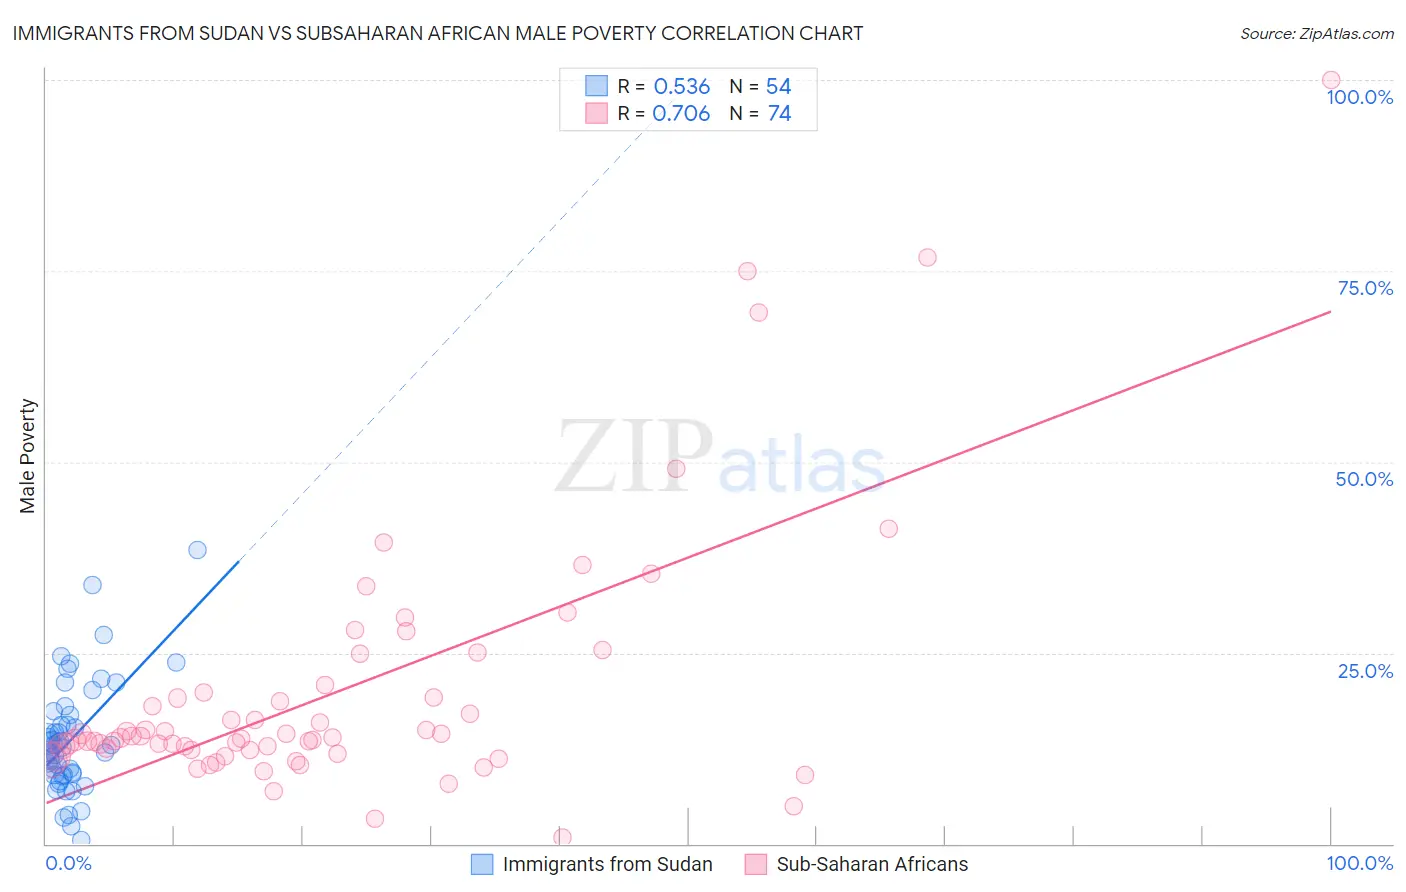 Immigrants from Sudan vs Subsaharan African Male Poverty